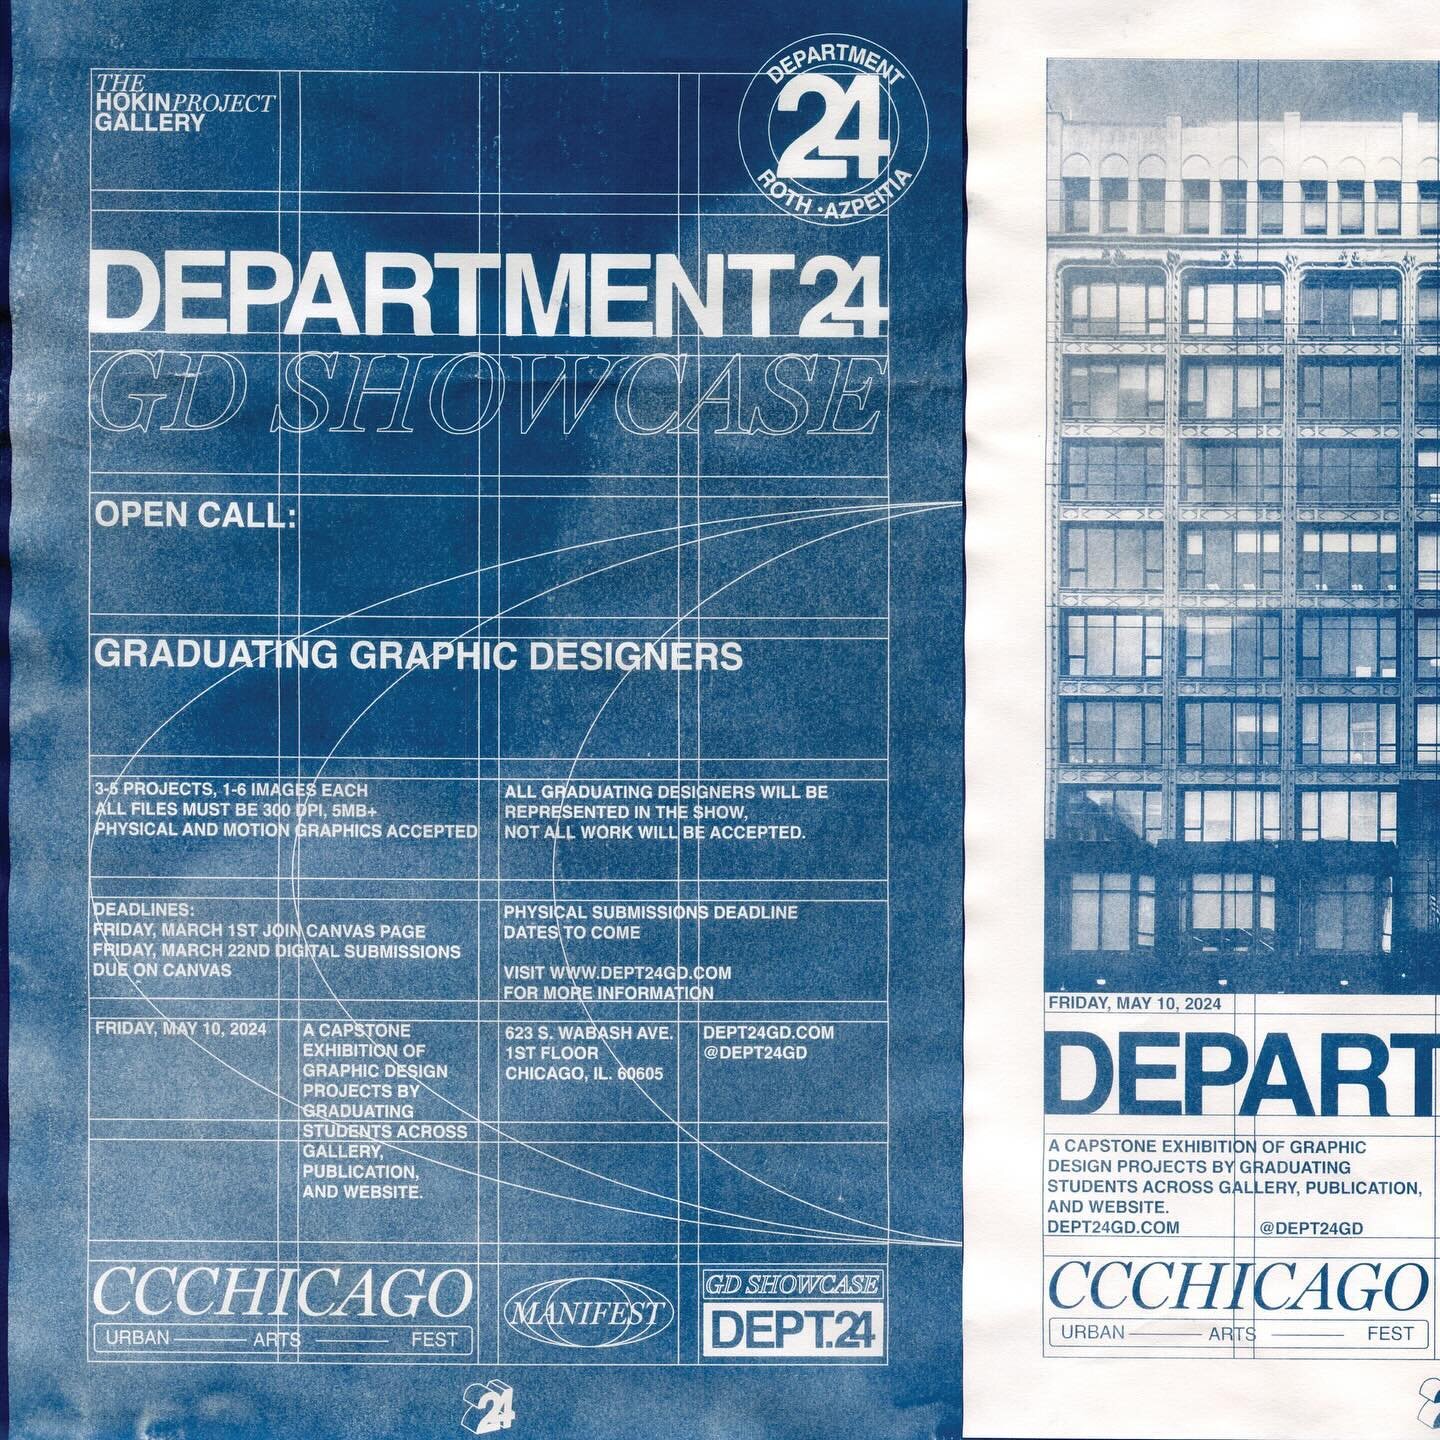 Department 24 posters going up early next week on a bulletin near you!

❗LAST CALL - Graphic Design Manifest Information❗

Our brand for this year is called Department 24. Department 24 is going to be a physical showcase in the Hokin Gallery, on 1st&